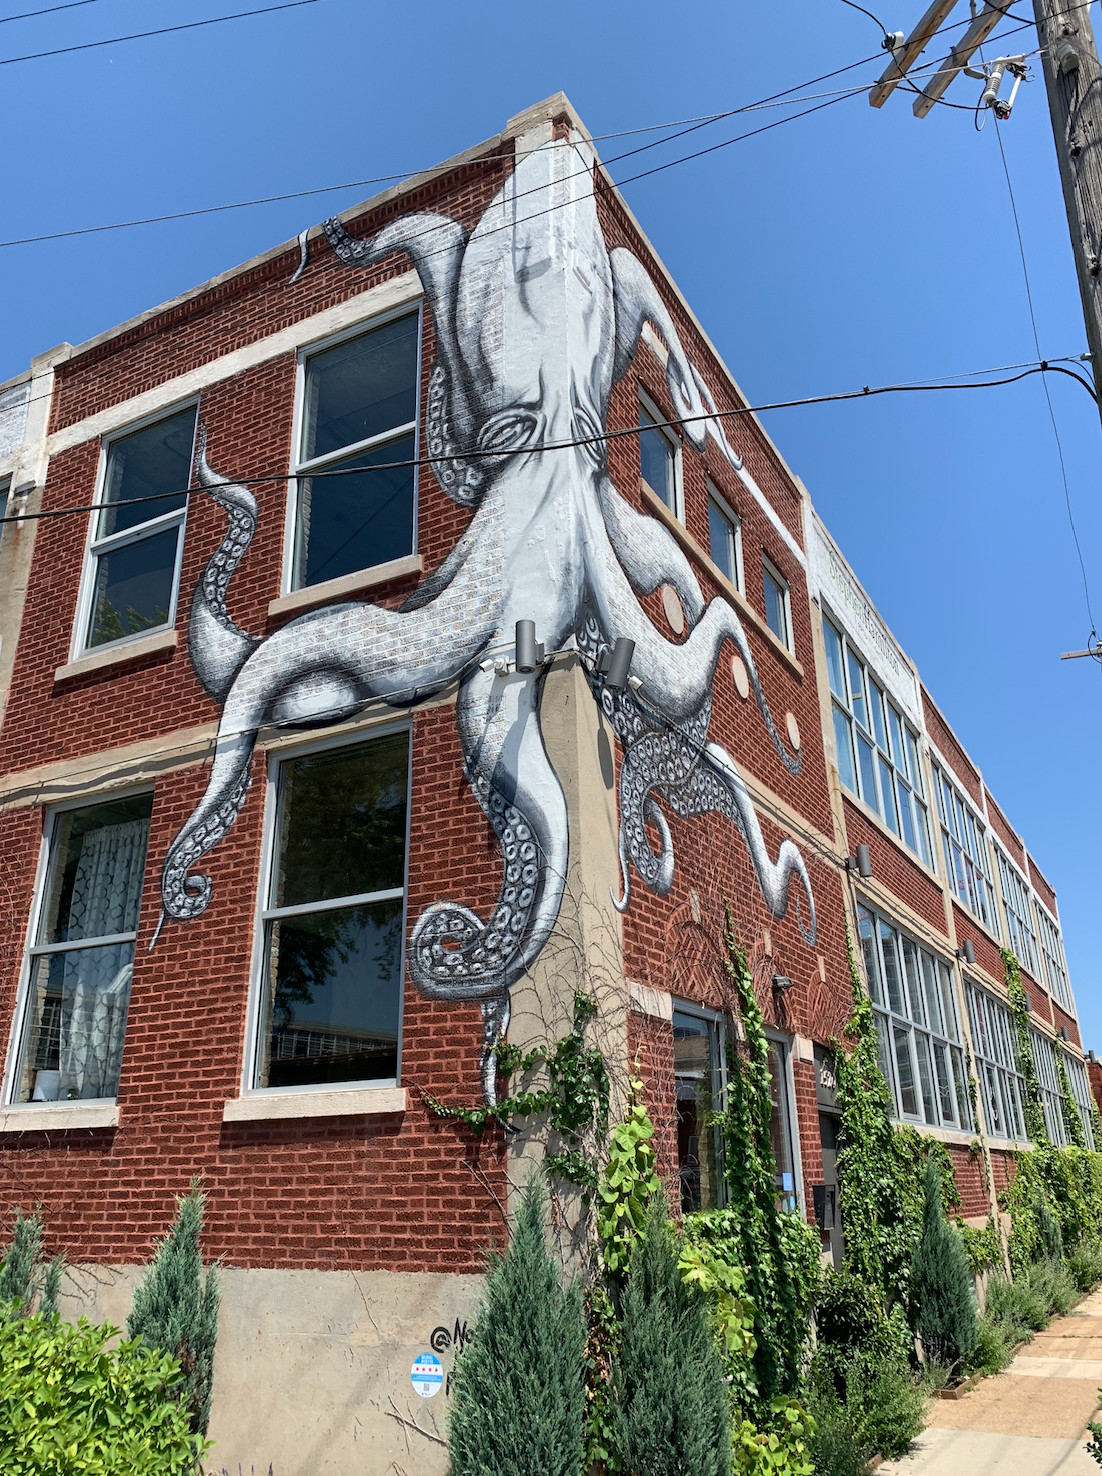 Chicago murals also include lighter fare, like this giant octopus by Dixon artist Nora Balayti on the Near West Side. The creature’s name? “Maud” — a nod to actress Maud Adams, who costarred with Roger Moore in the 1983 James Bond movie “Octopussy.”